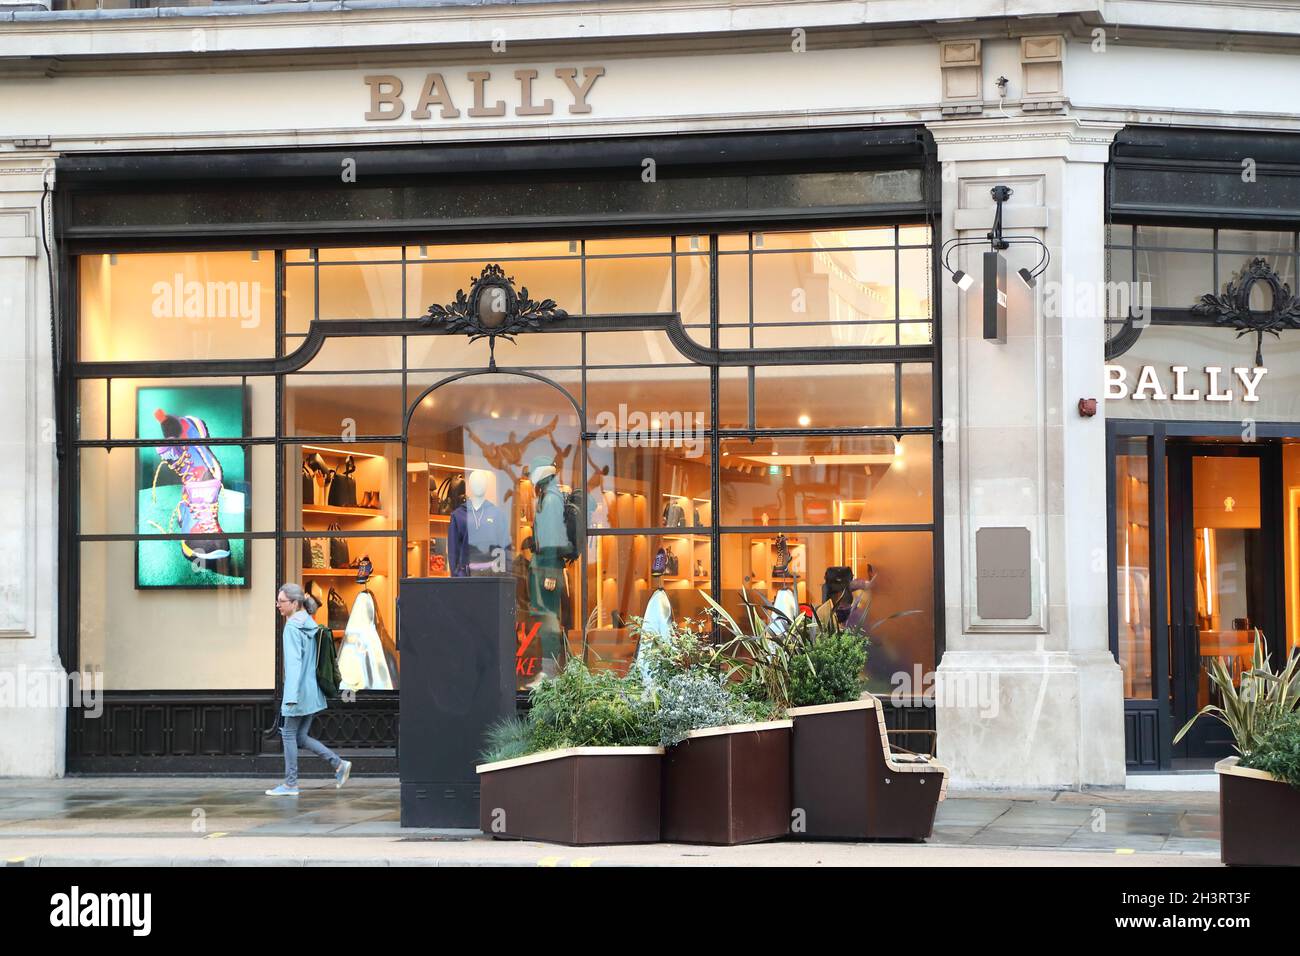 Bally Shoes High Resolution Stock Photography and Images - Alamy